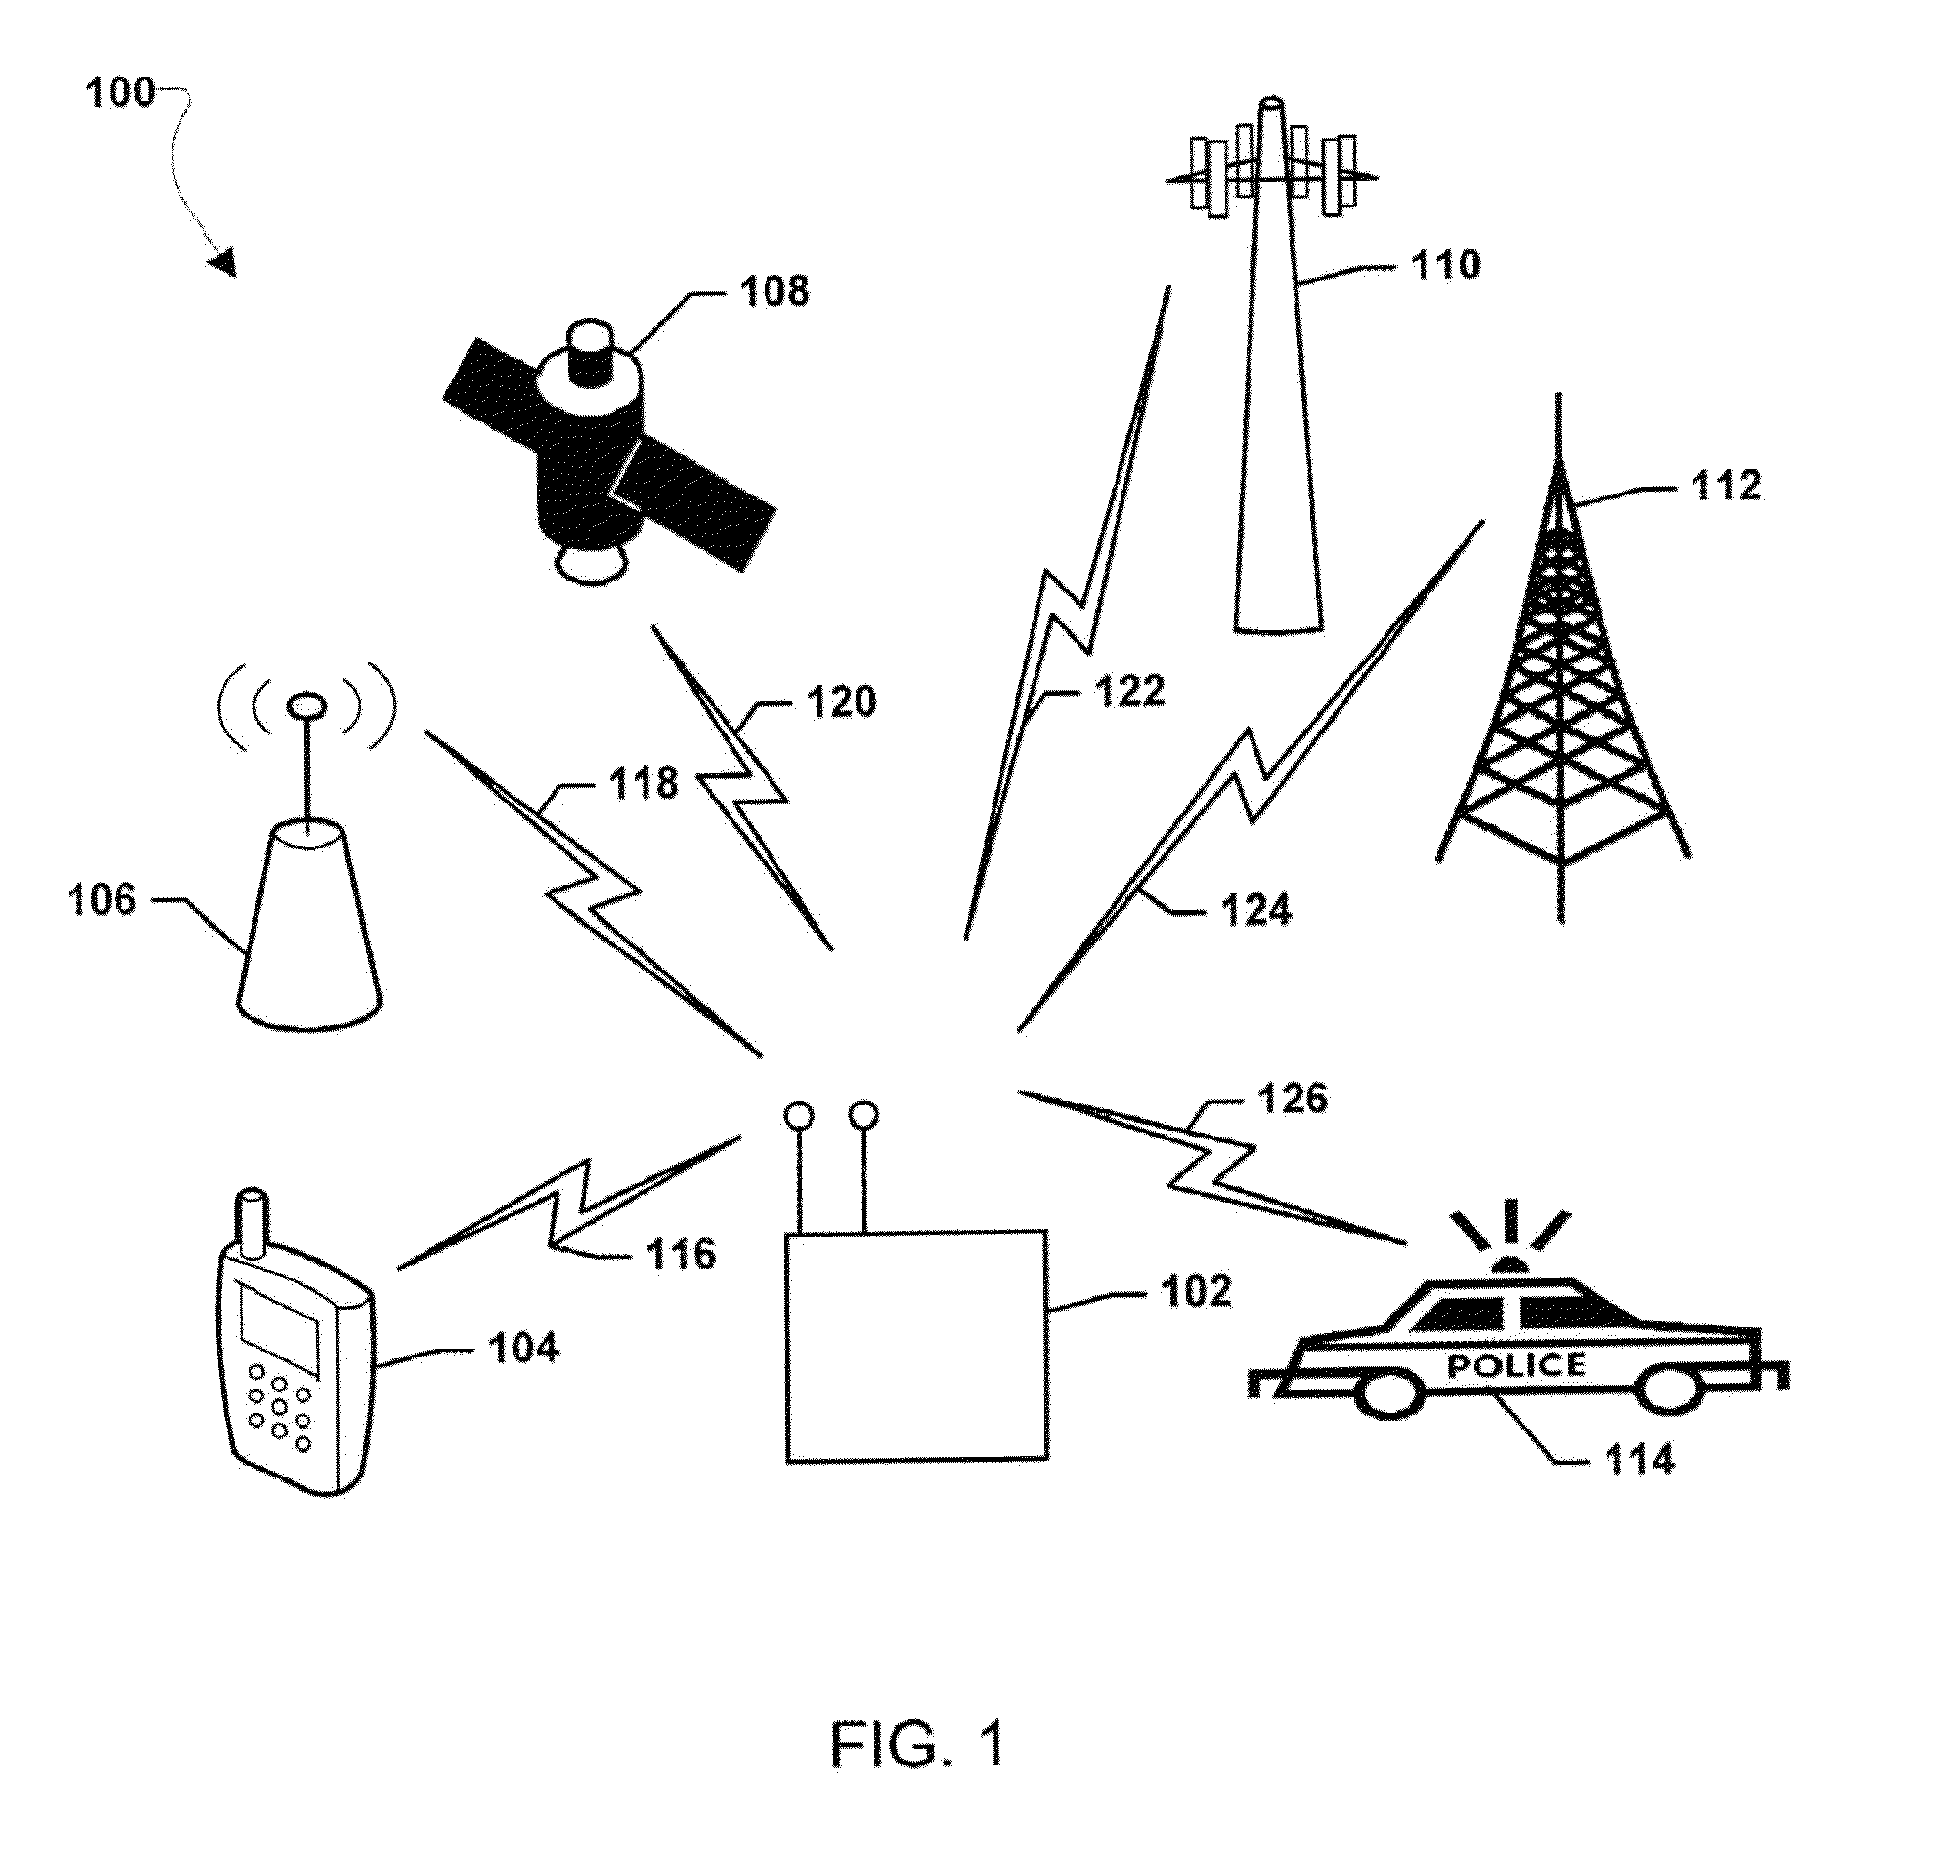 Systems, Methods, and Devices for Electronic Spectrum Management with Remote Access to Data in a Virtual Computing Network